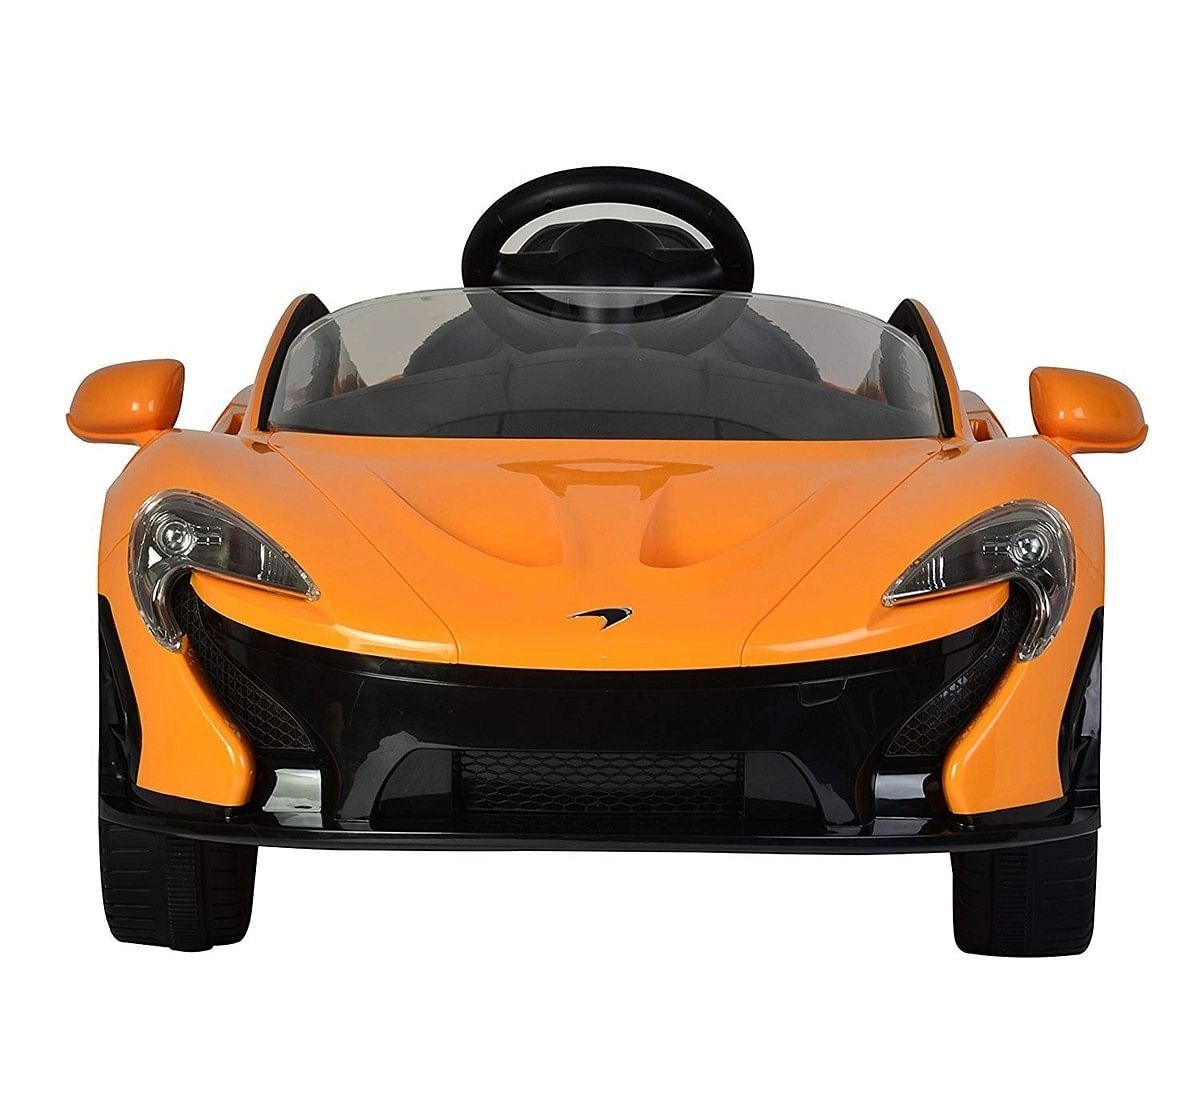 Chilokbo McLaren P1 Battery Operated Ride-on Car Orange Battery Operated Rideons for Kids age 18M + (Orange)